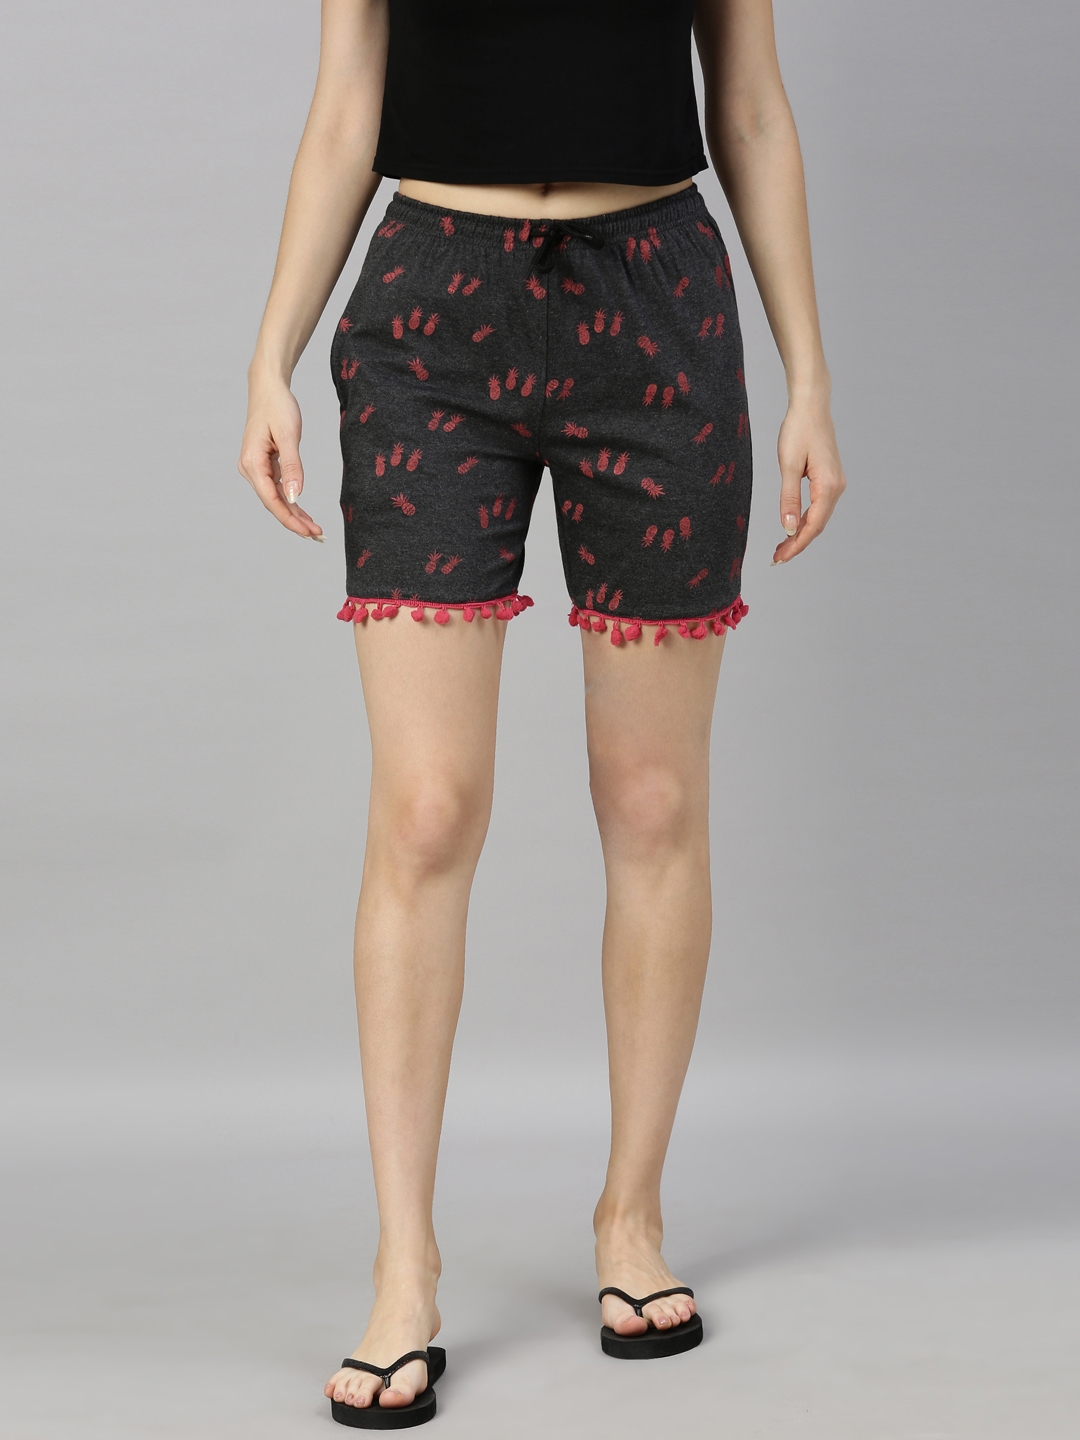 Kryptic | Kryptic Womens Charcoal Grey Printed Lounge Shorts